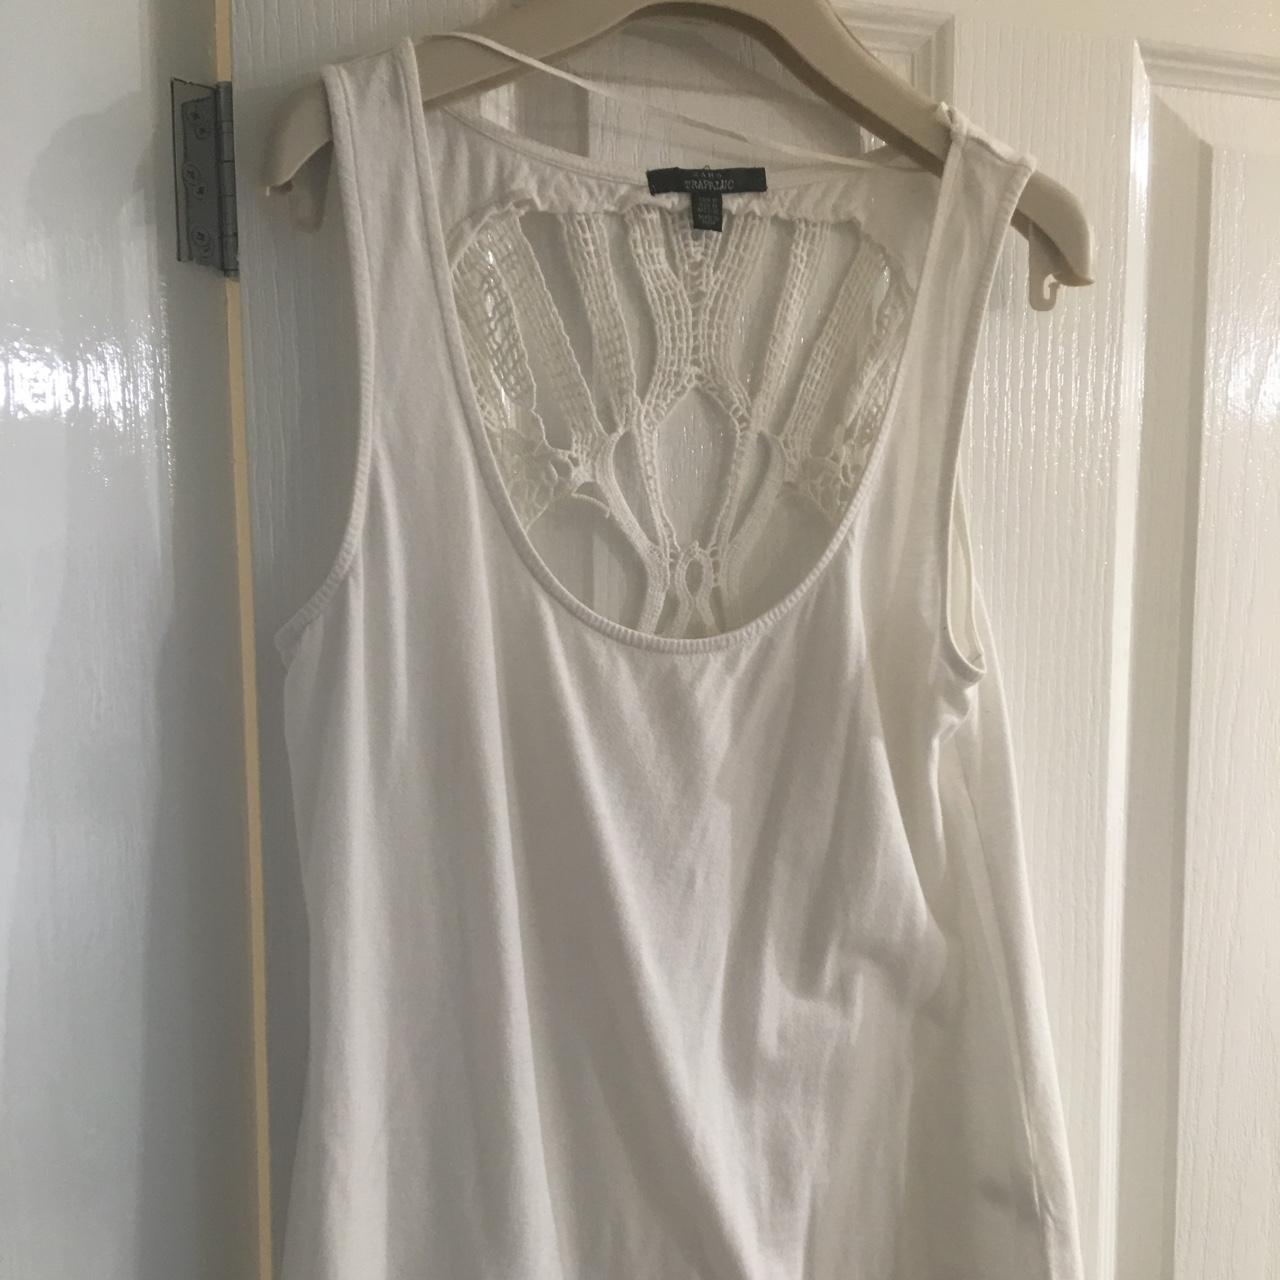 Zara white top scull cut out at back - Depop